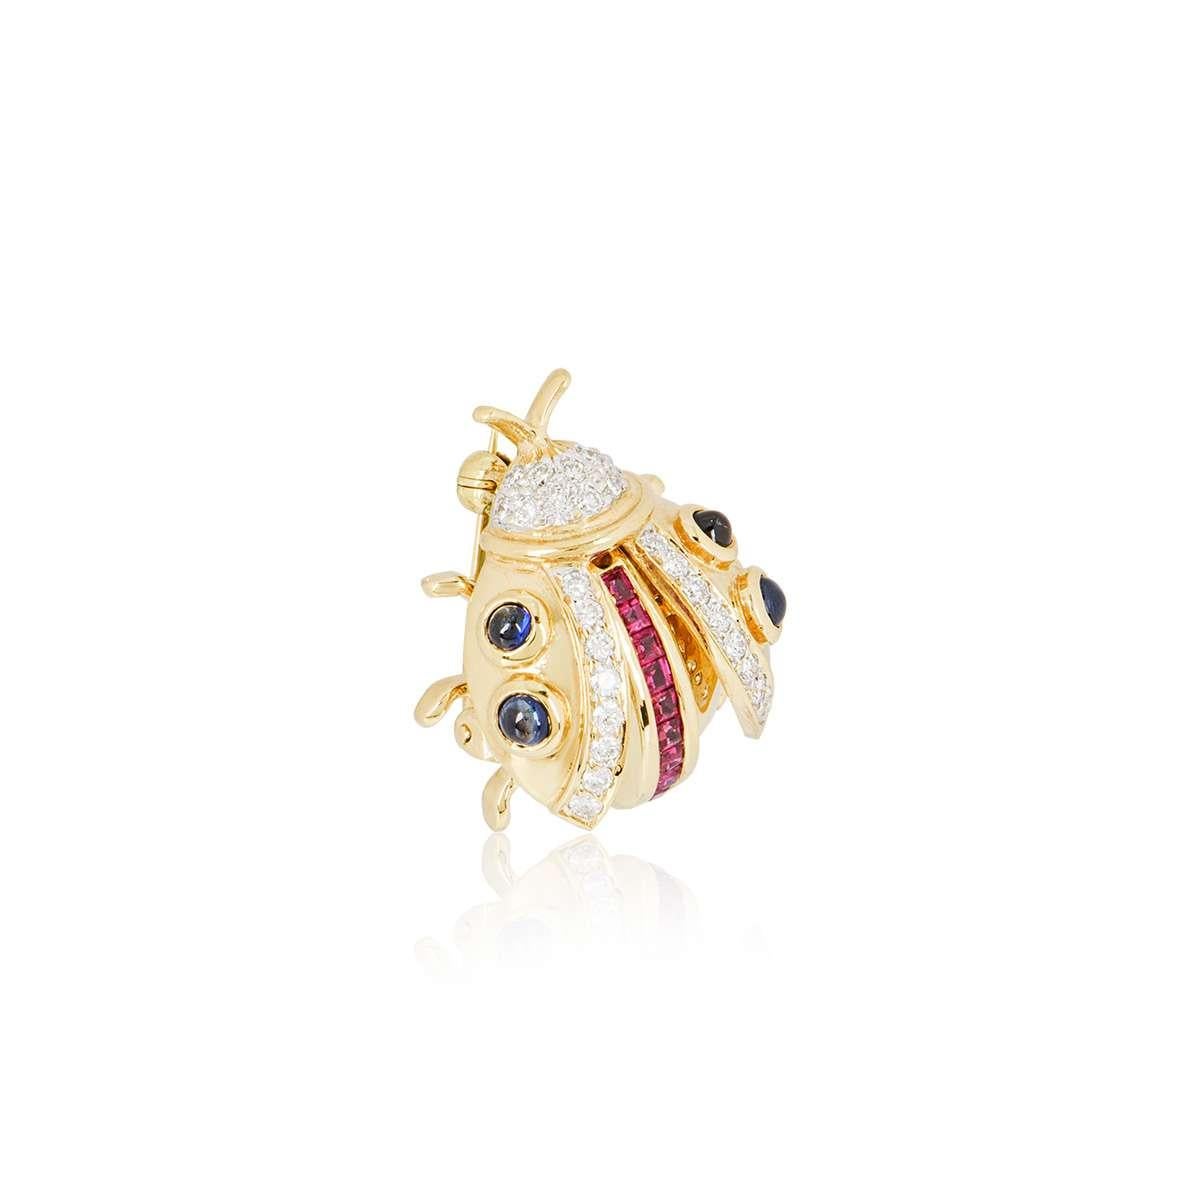 An 18k yellow gold Ladybird brooch. The brooch is set with 4 cabochon sapphires throughout the wings, with a row of 9 square cut rubies running through the centre of the body and 28 round brilliant cut diamonds set in the wings and head. The rubies